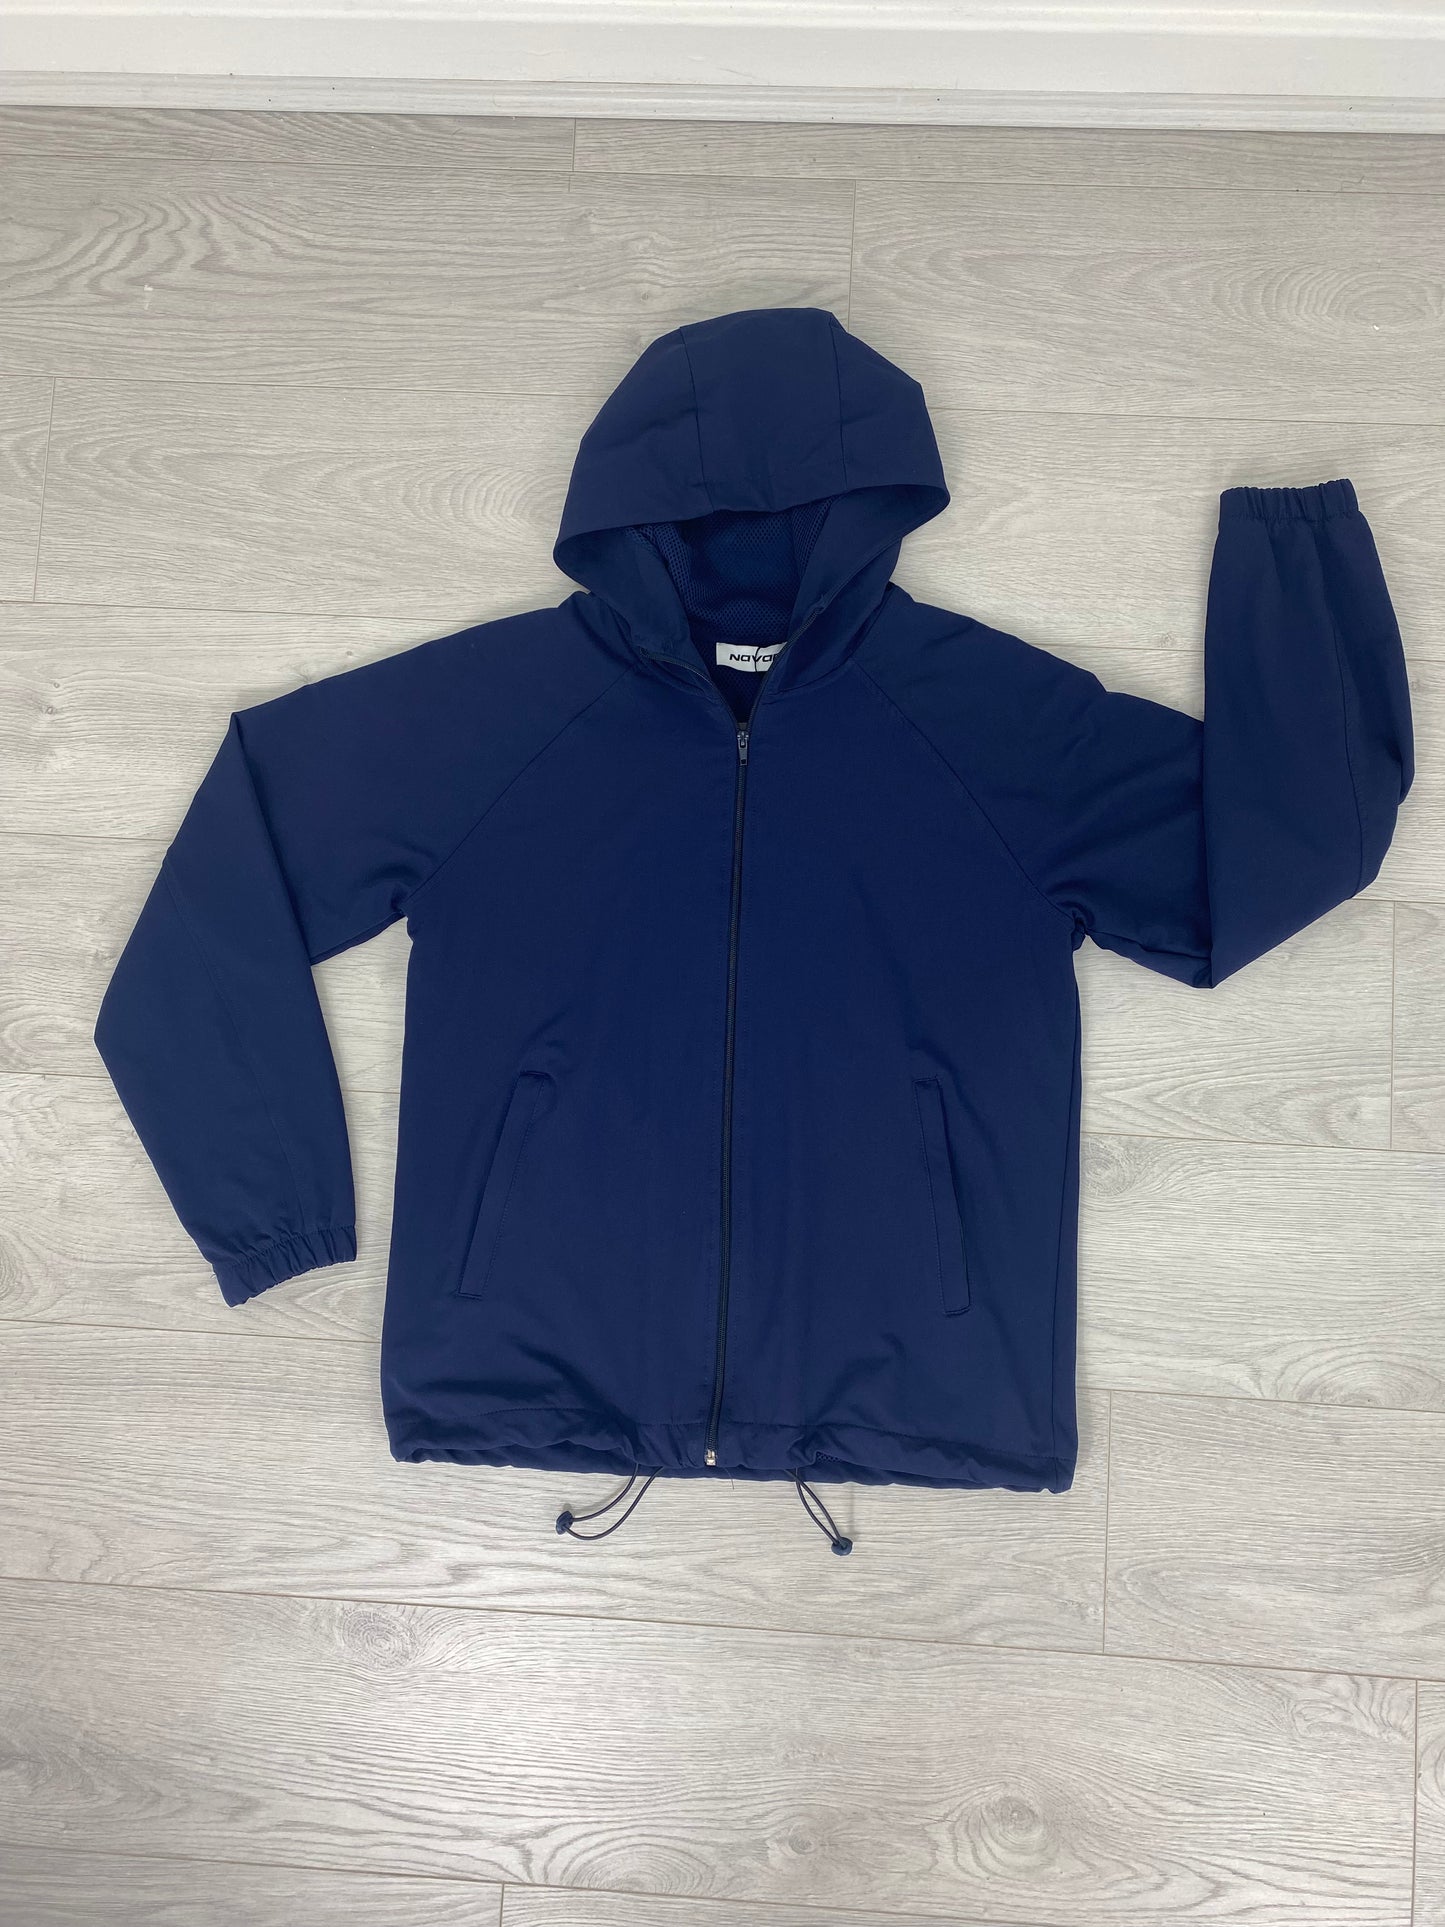 Navy Hooded Wind cheater Jacket